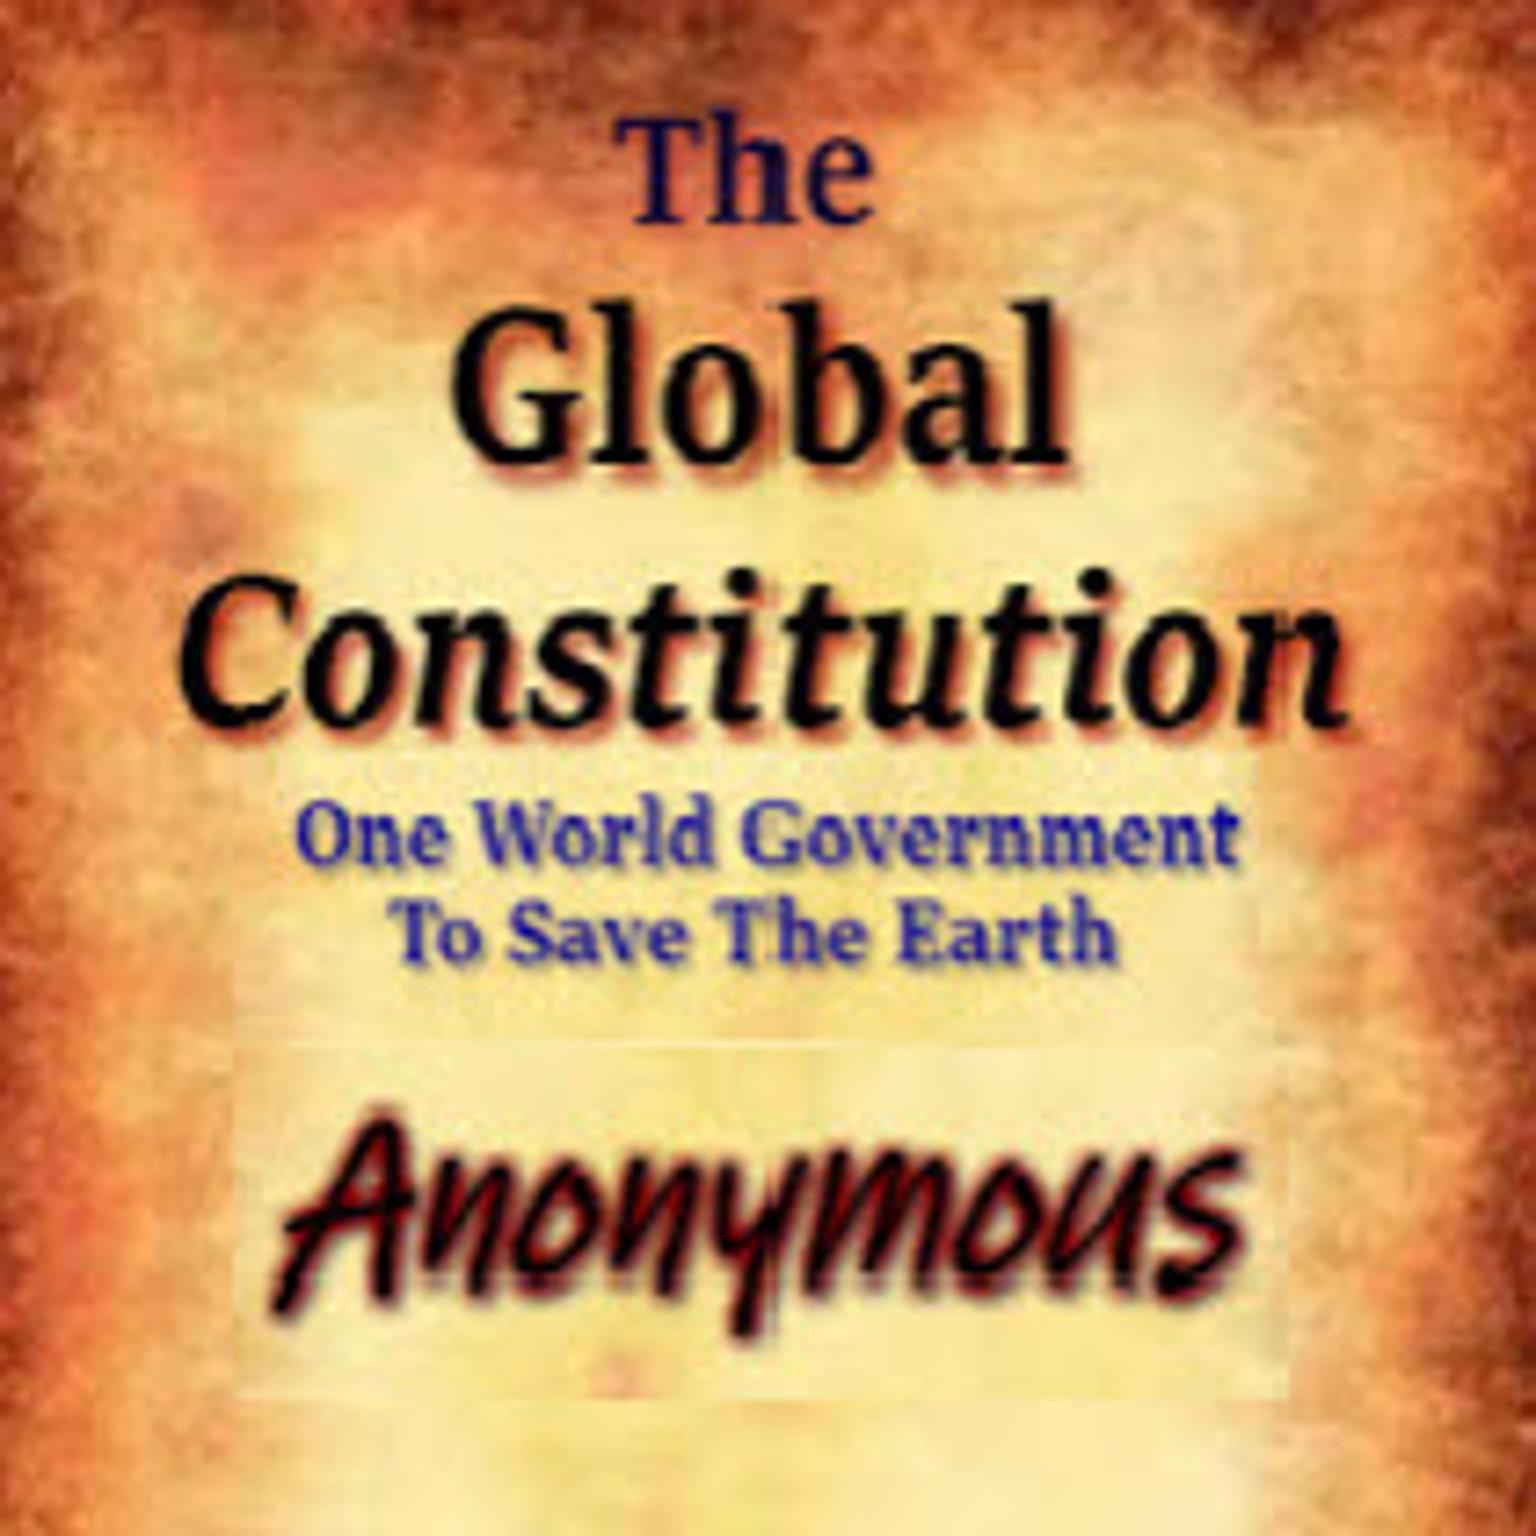 The Global Constitution Audiobook Listen Instantly!